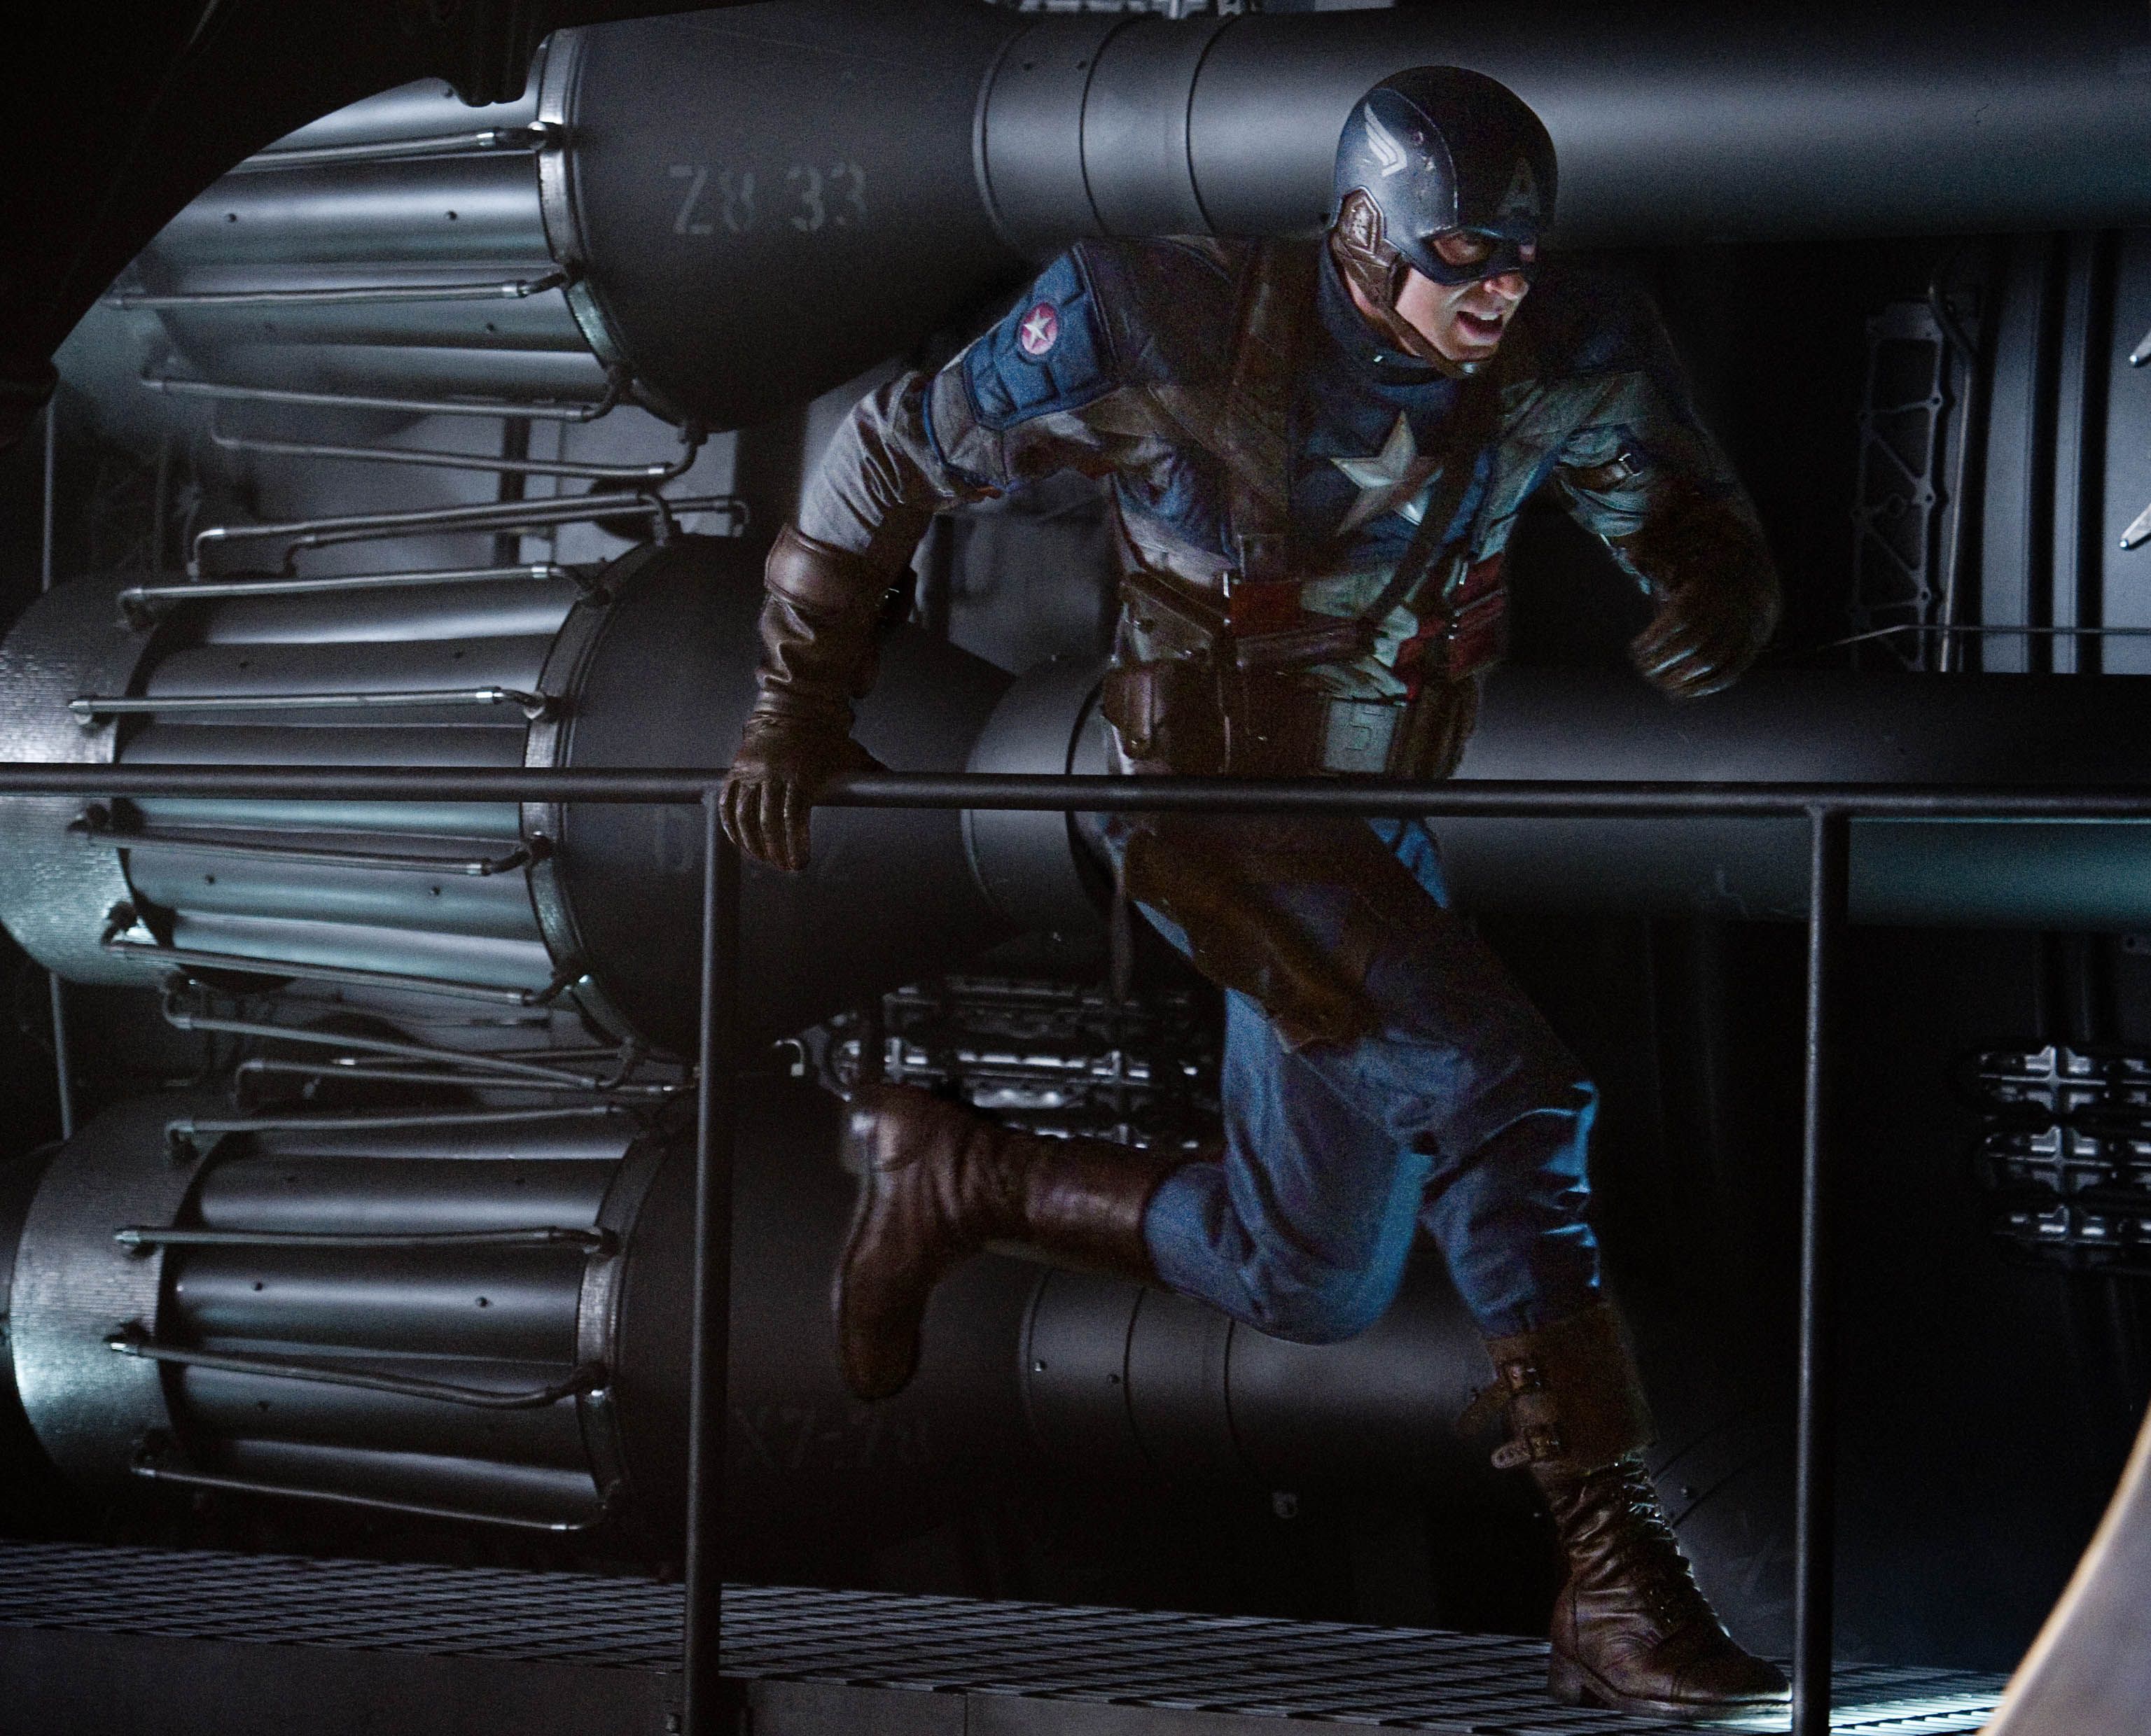 CAPTAIN AMERICA: THE FIRST AVENGER Clip And Image; Early Screening At Comic Con?